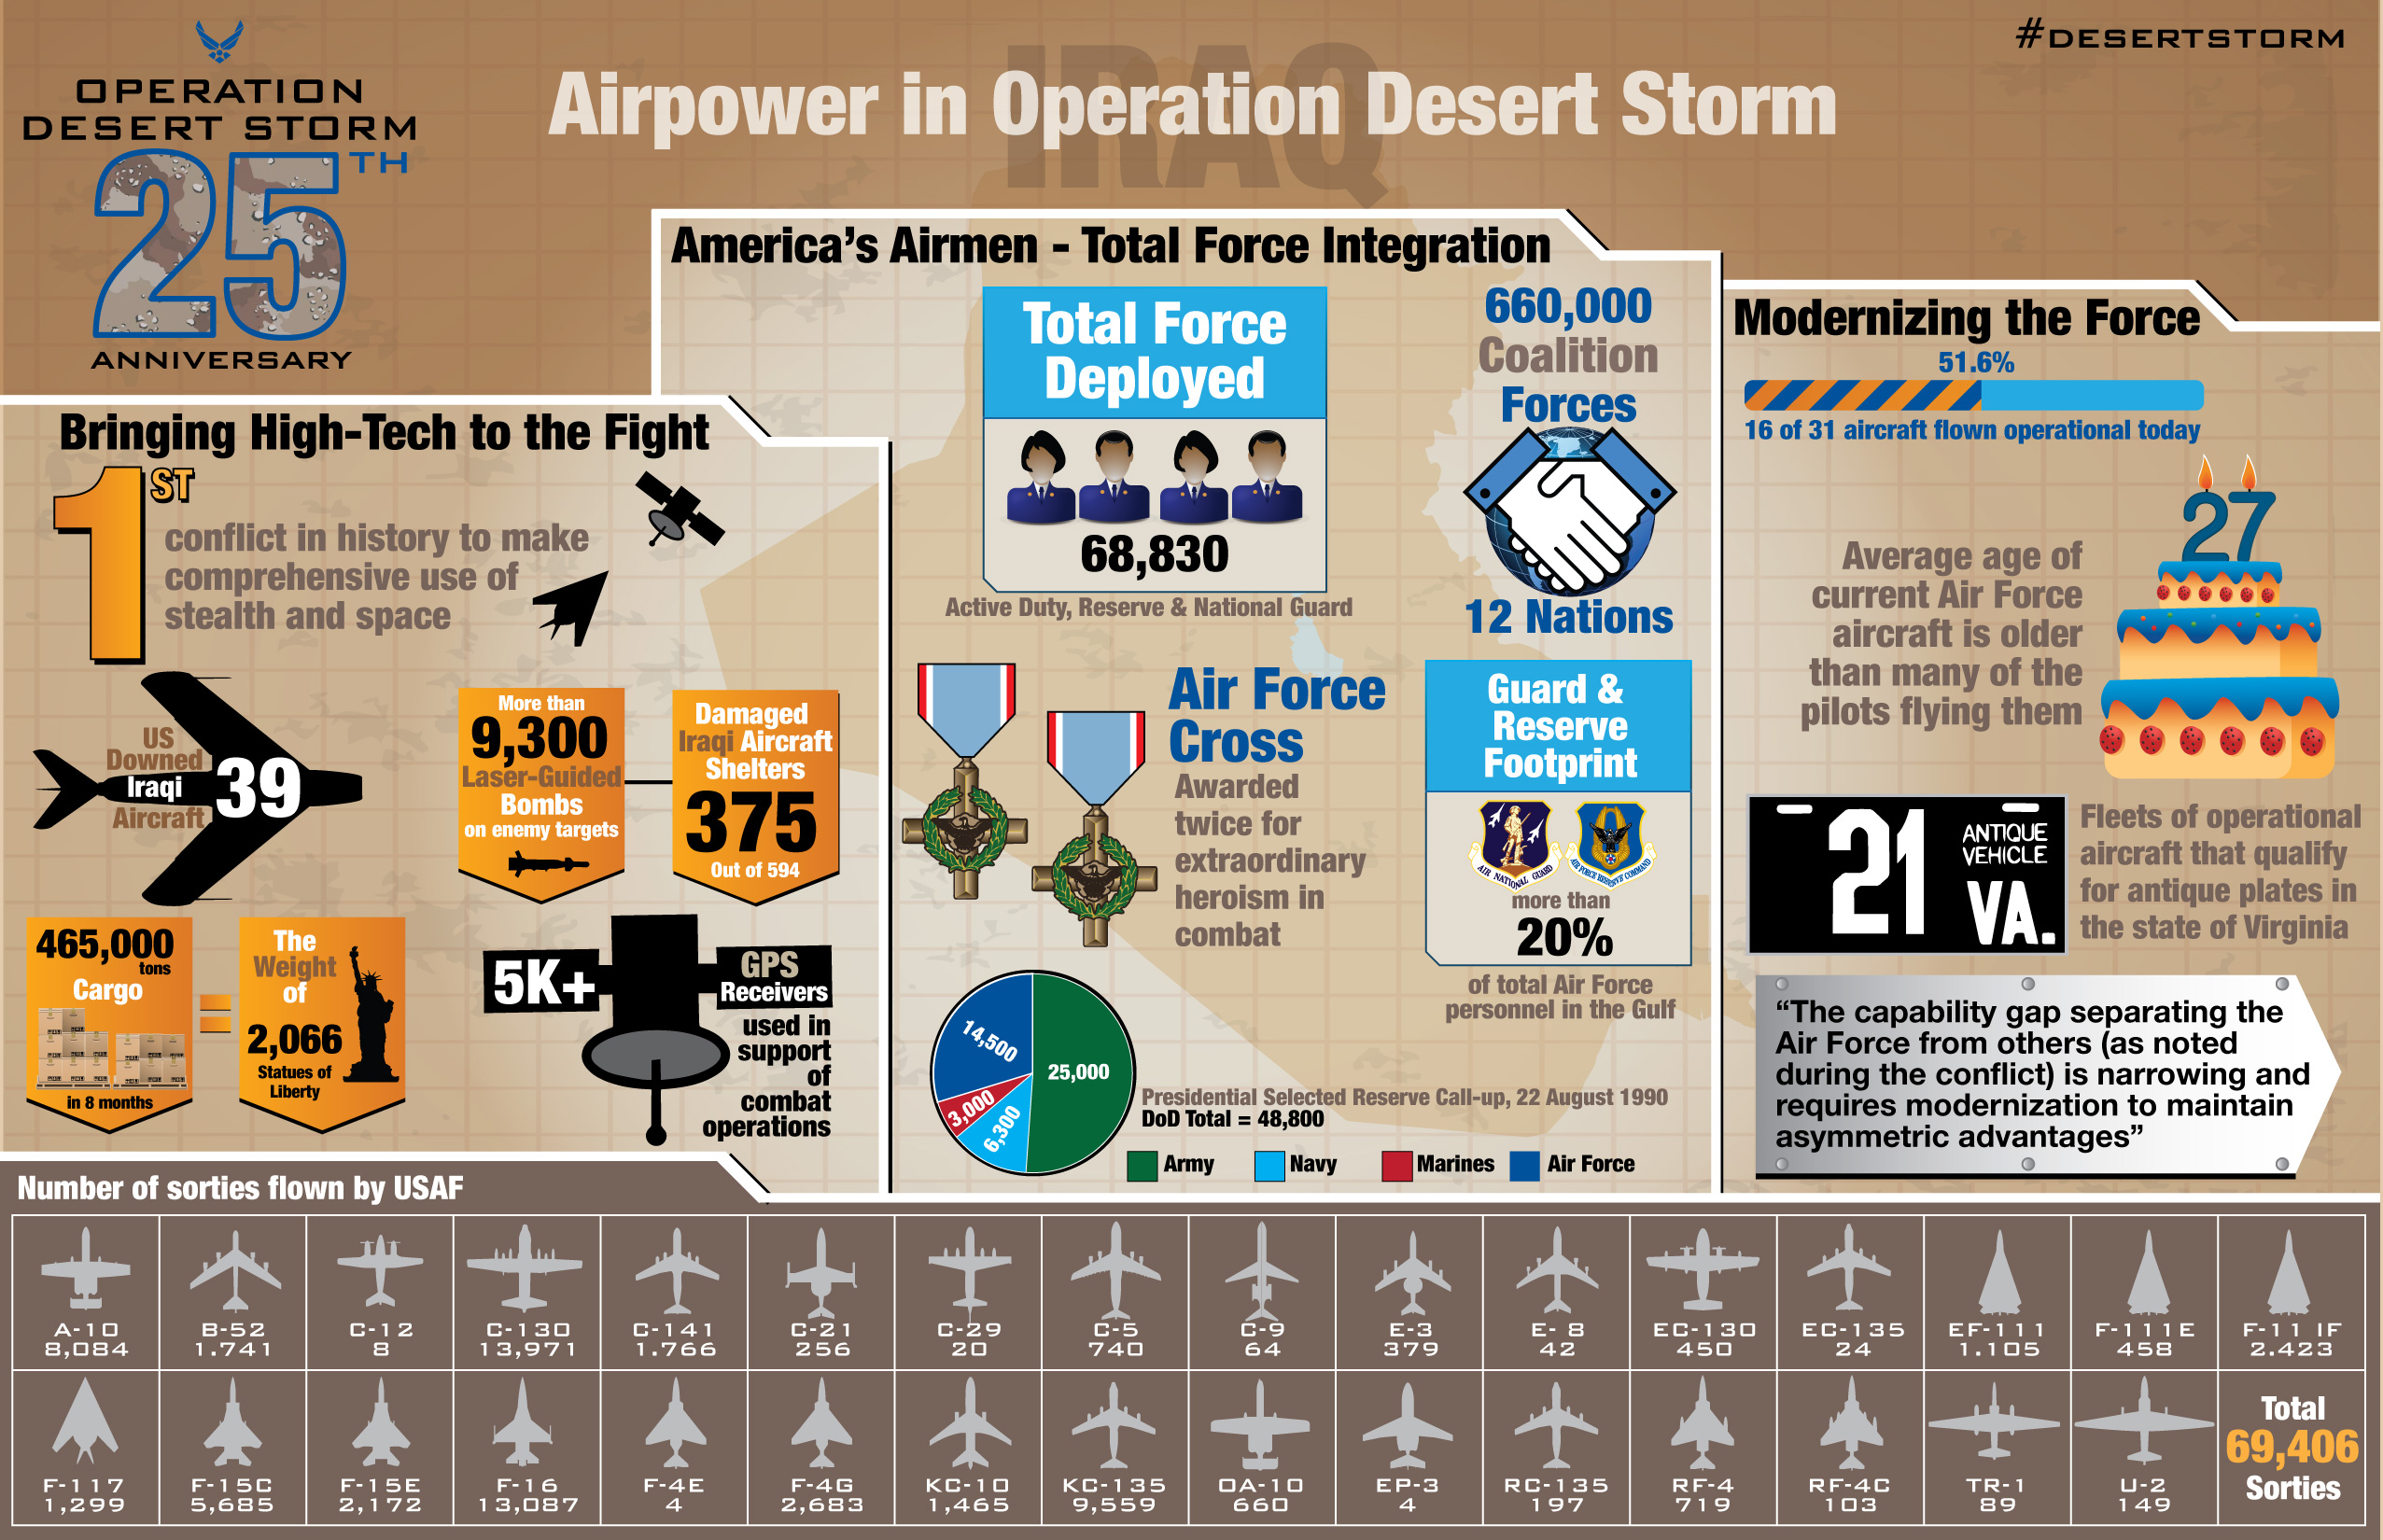 Airpower in Operation Desert Storm